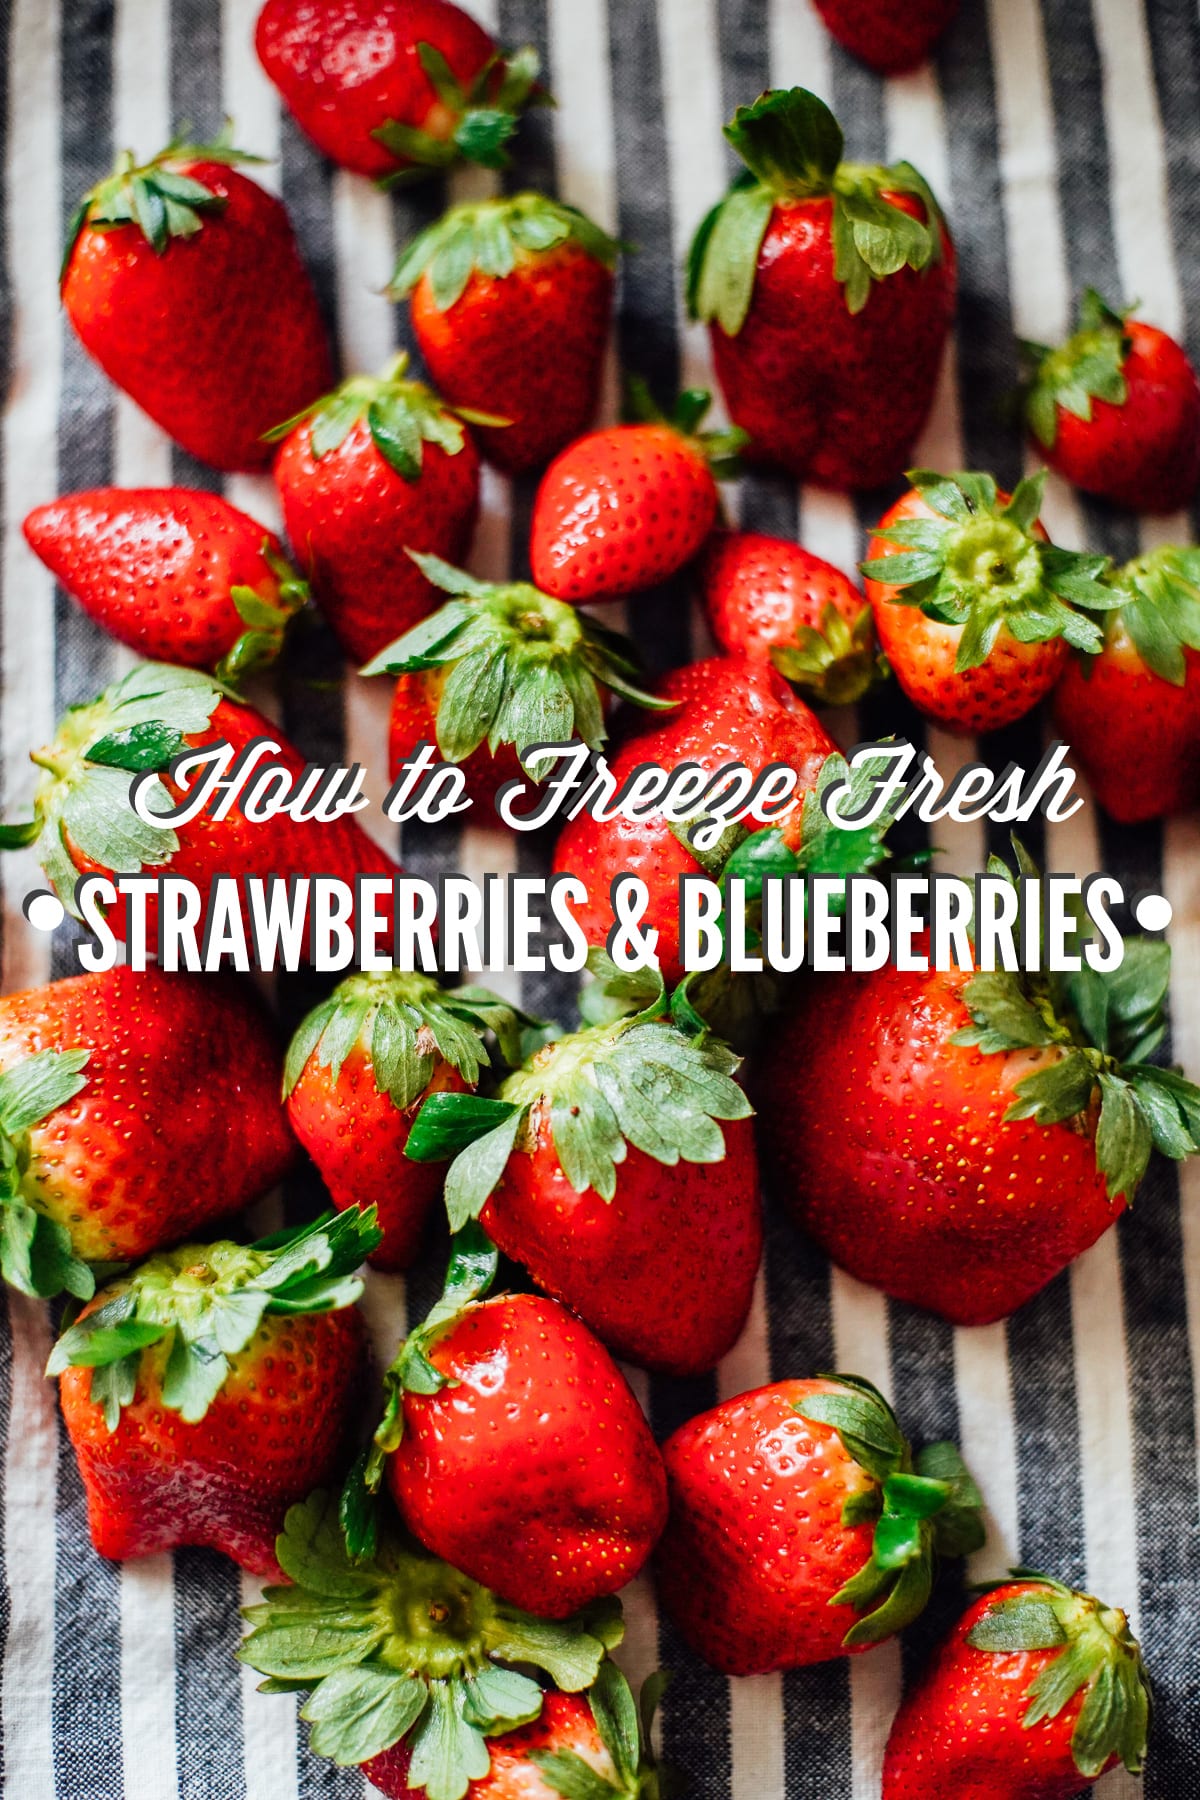 How to Freeze Fresh Strawberries and Blueberries